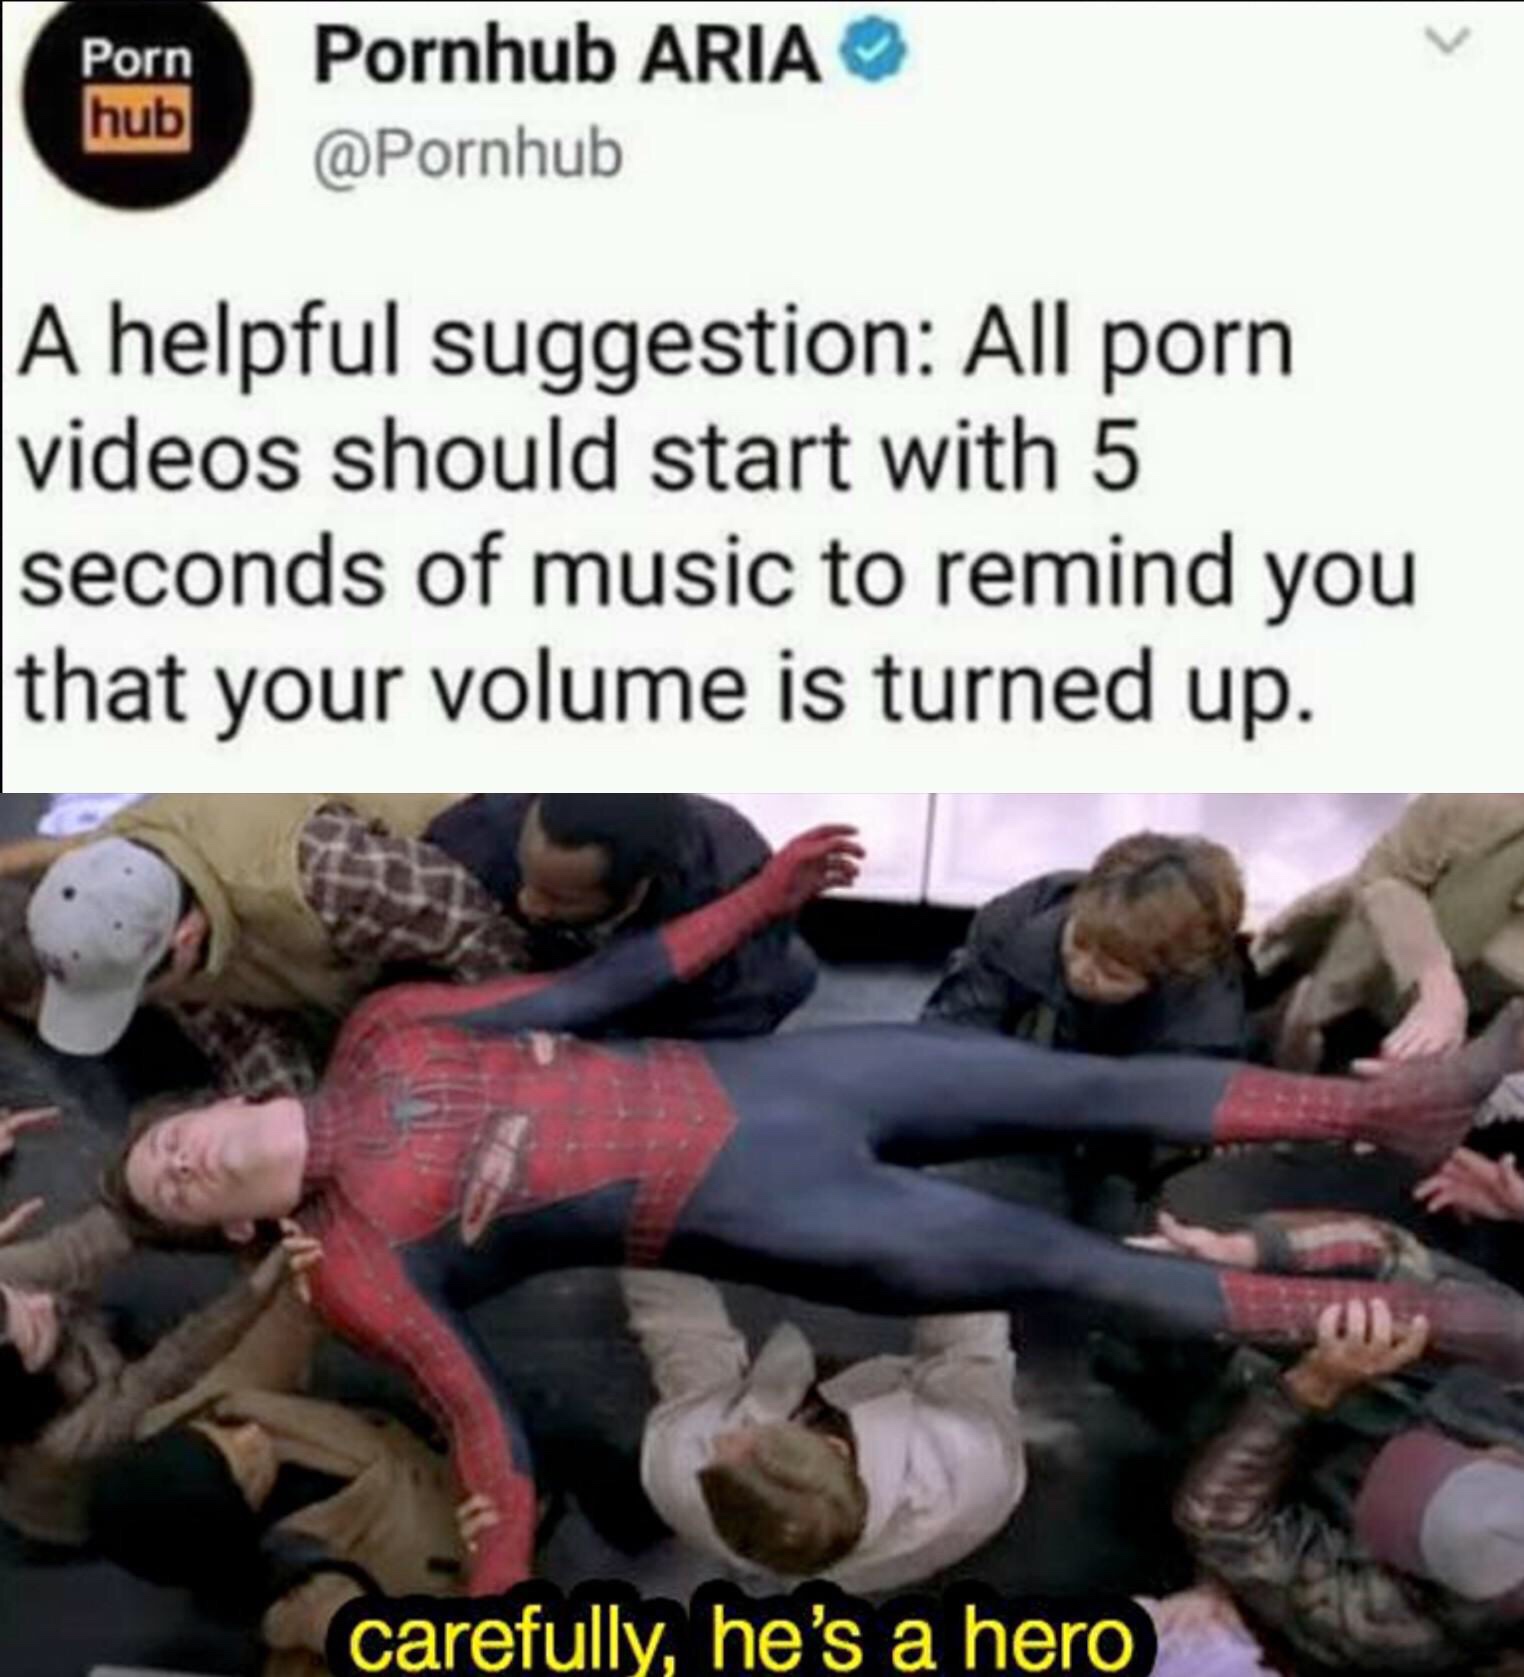 carefully he's a hero - Porn hub Pornhub Aria A helpful suggestion All porn videos should start with 5 seconds of music to remind you that your volume is turned up. carefully, he's a hero